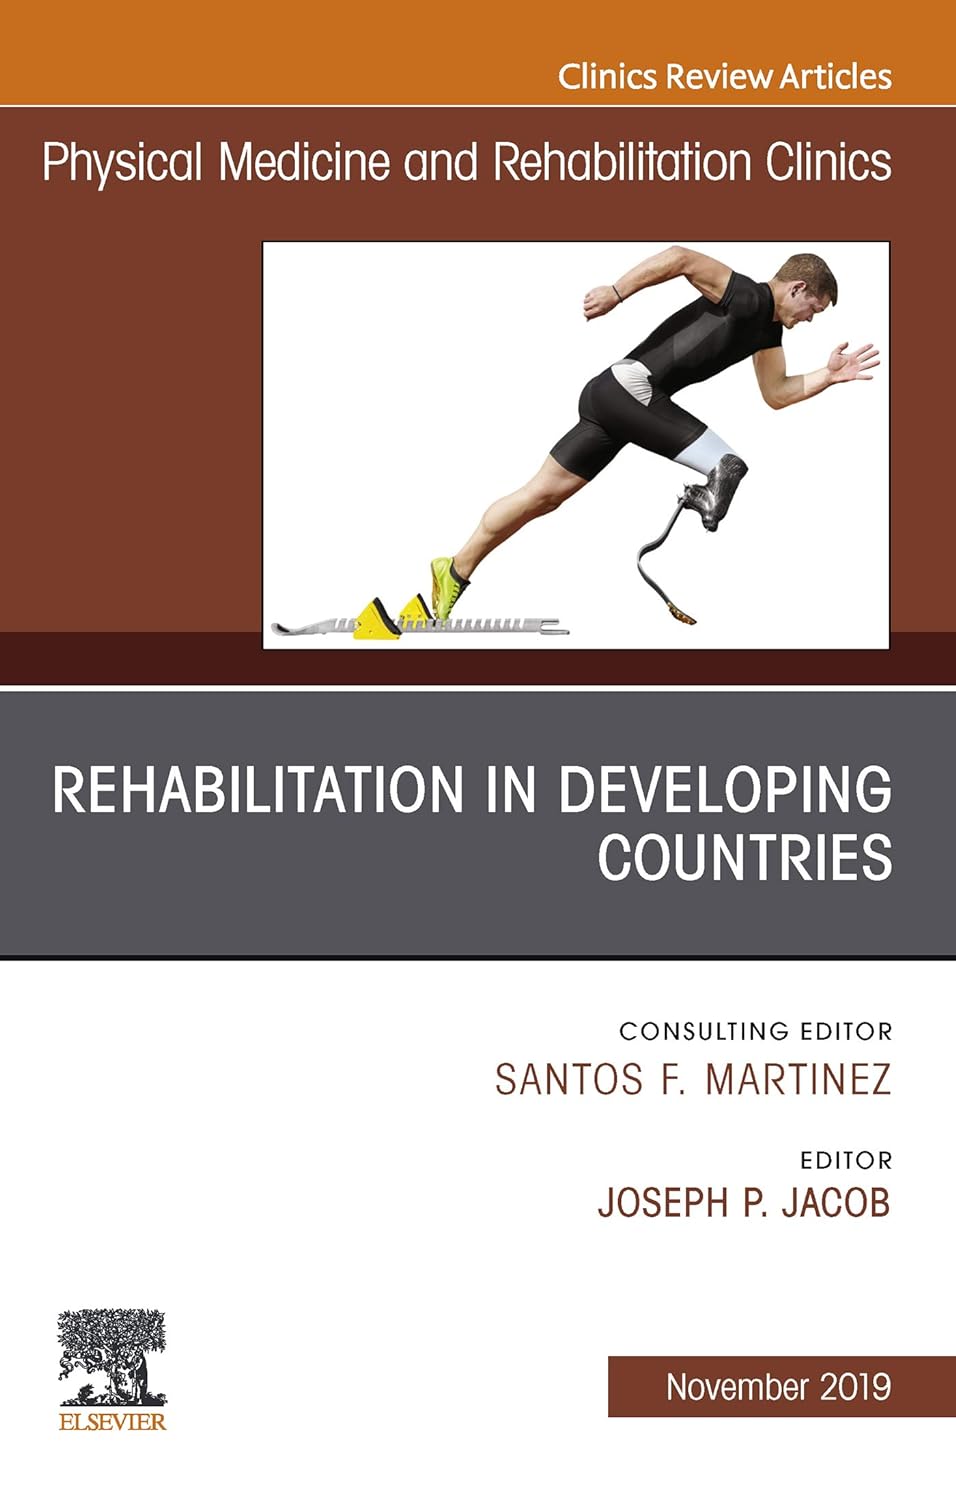 Rehabilitation in Developing Countries, An Issue of Physical Medicine and Rehabilitation Clinics of North America (Volume 30-4) (The Clinics: Radiology, Volume 30-4) by Joseph Jacobs